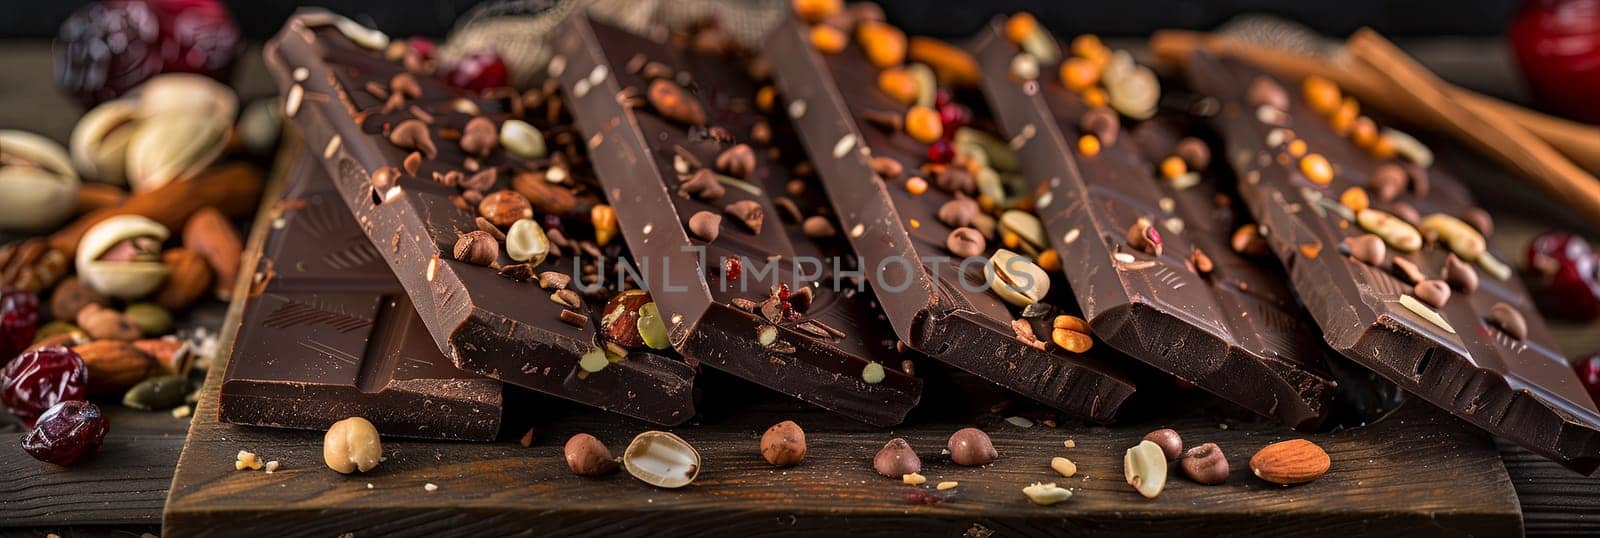 Detailed close up of a chocolate bar filled with nuts, showcasing rich textures and natural ingredients.